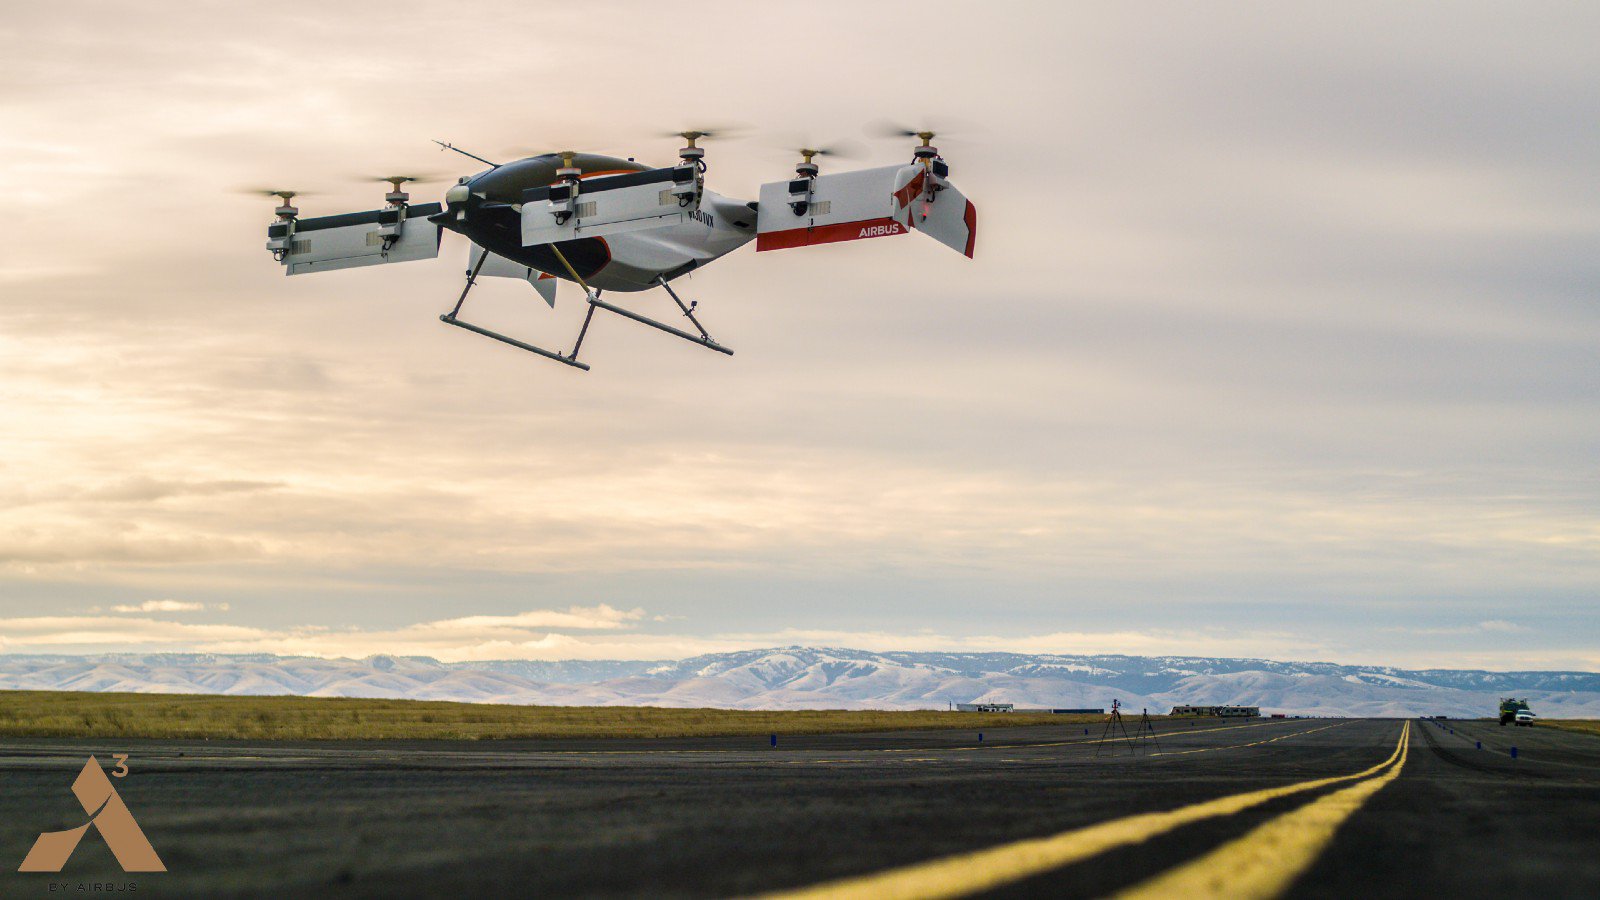 Airbus conducted the first tests of pilotless flying taxi